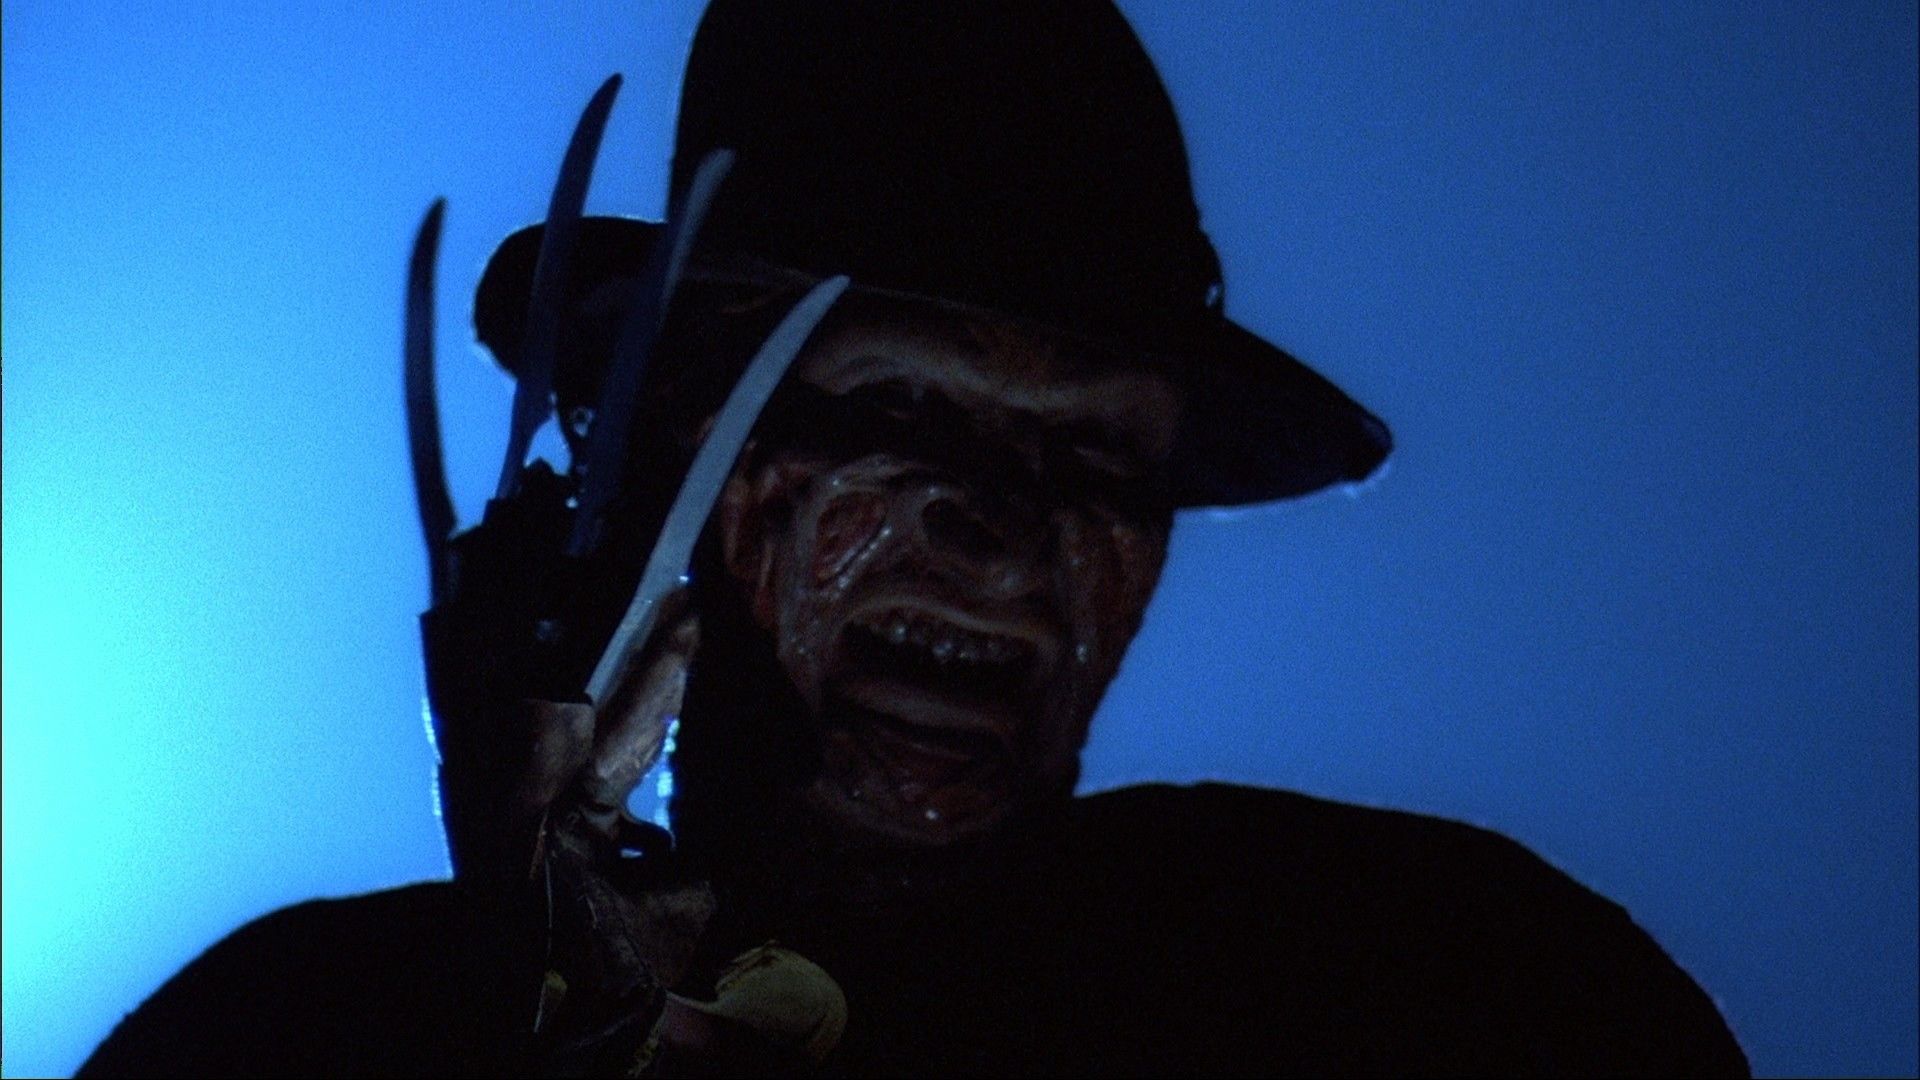 How Wes Craven Prepped His Audience for Pain in 'A Nightmare on Elm Street'